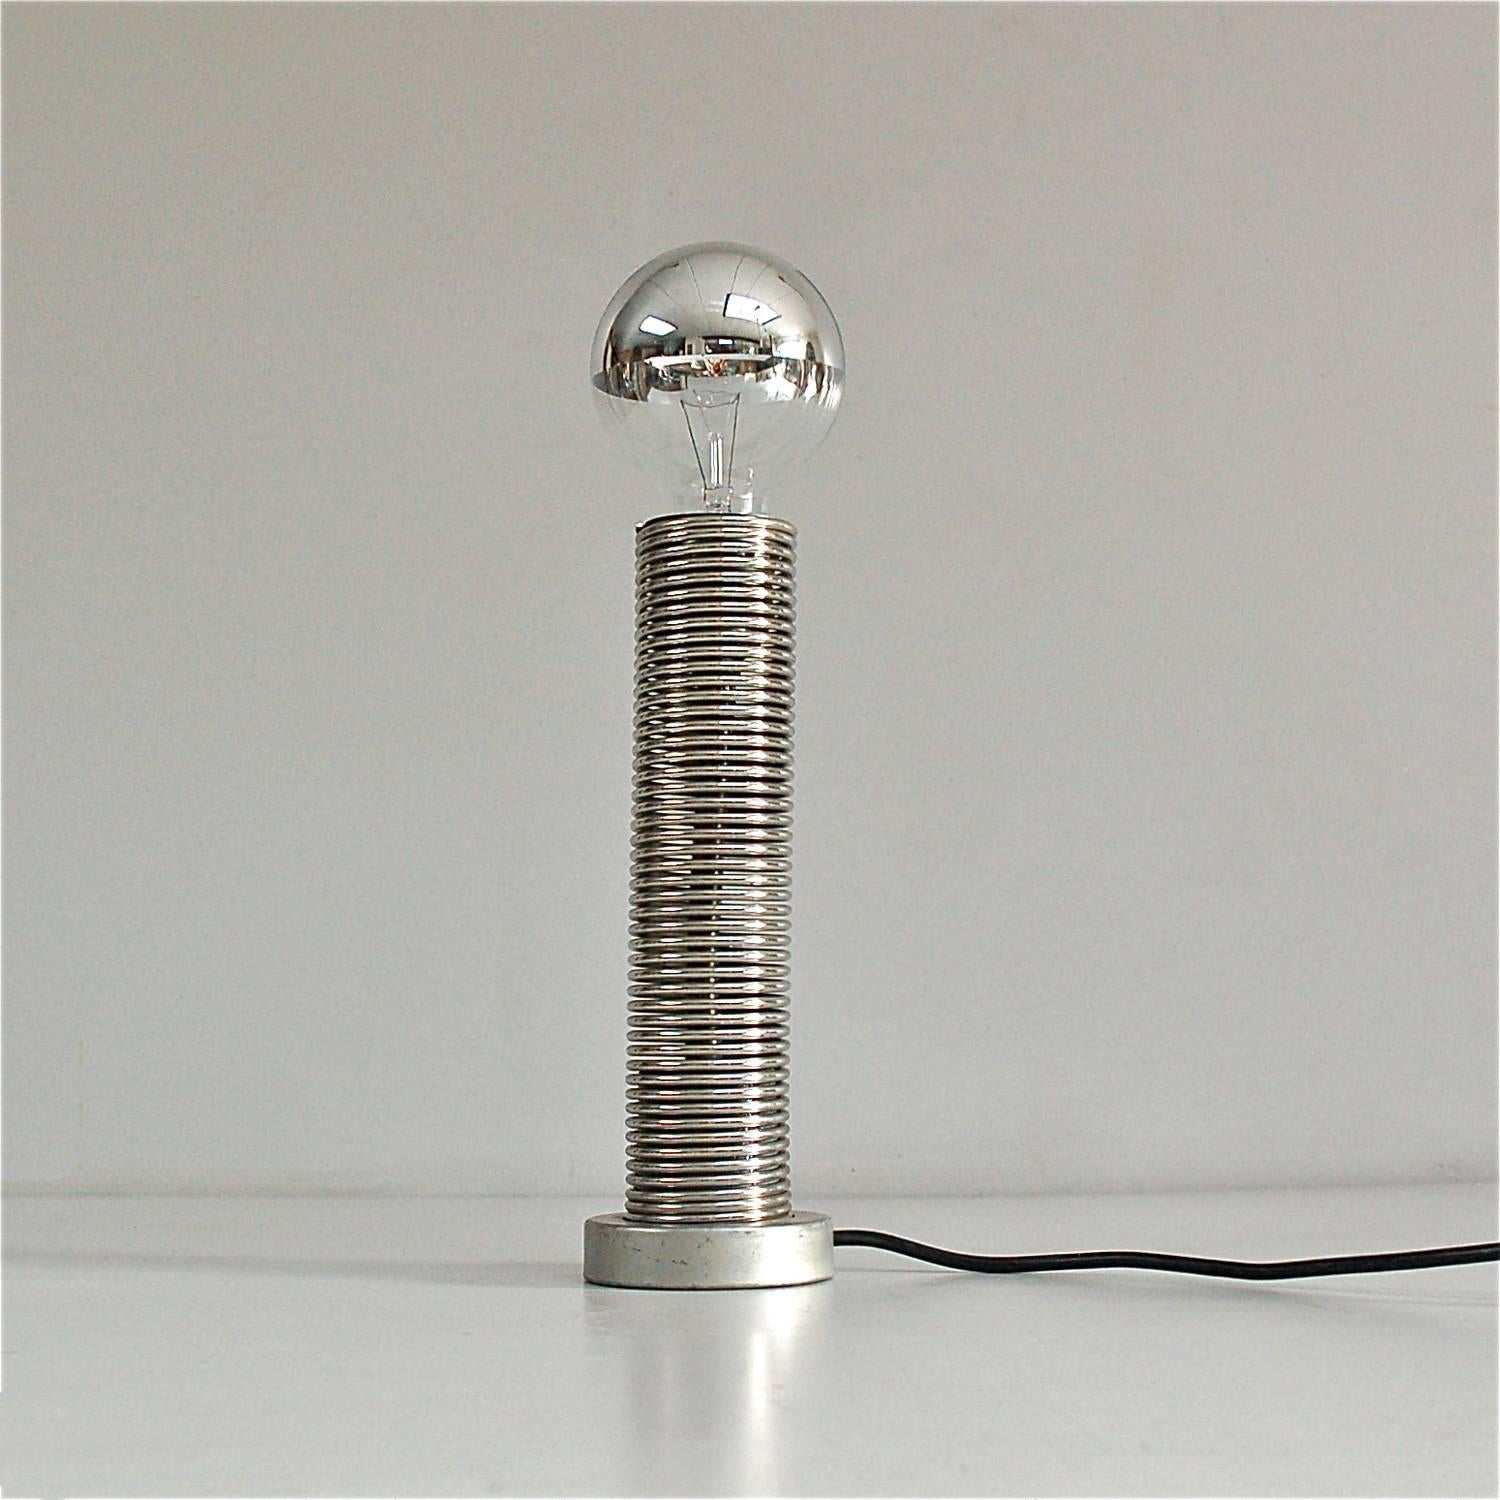 Coil or spring lamp with a flexible, bendable arm that can be adjusted to direct the light. Suitable for use as a table or desk lamp.